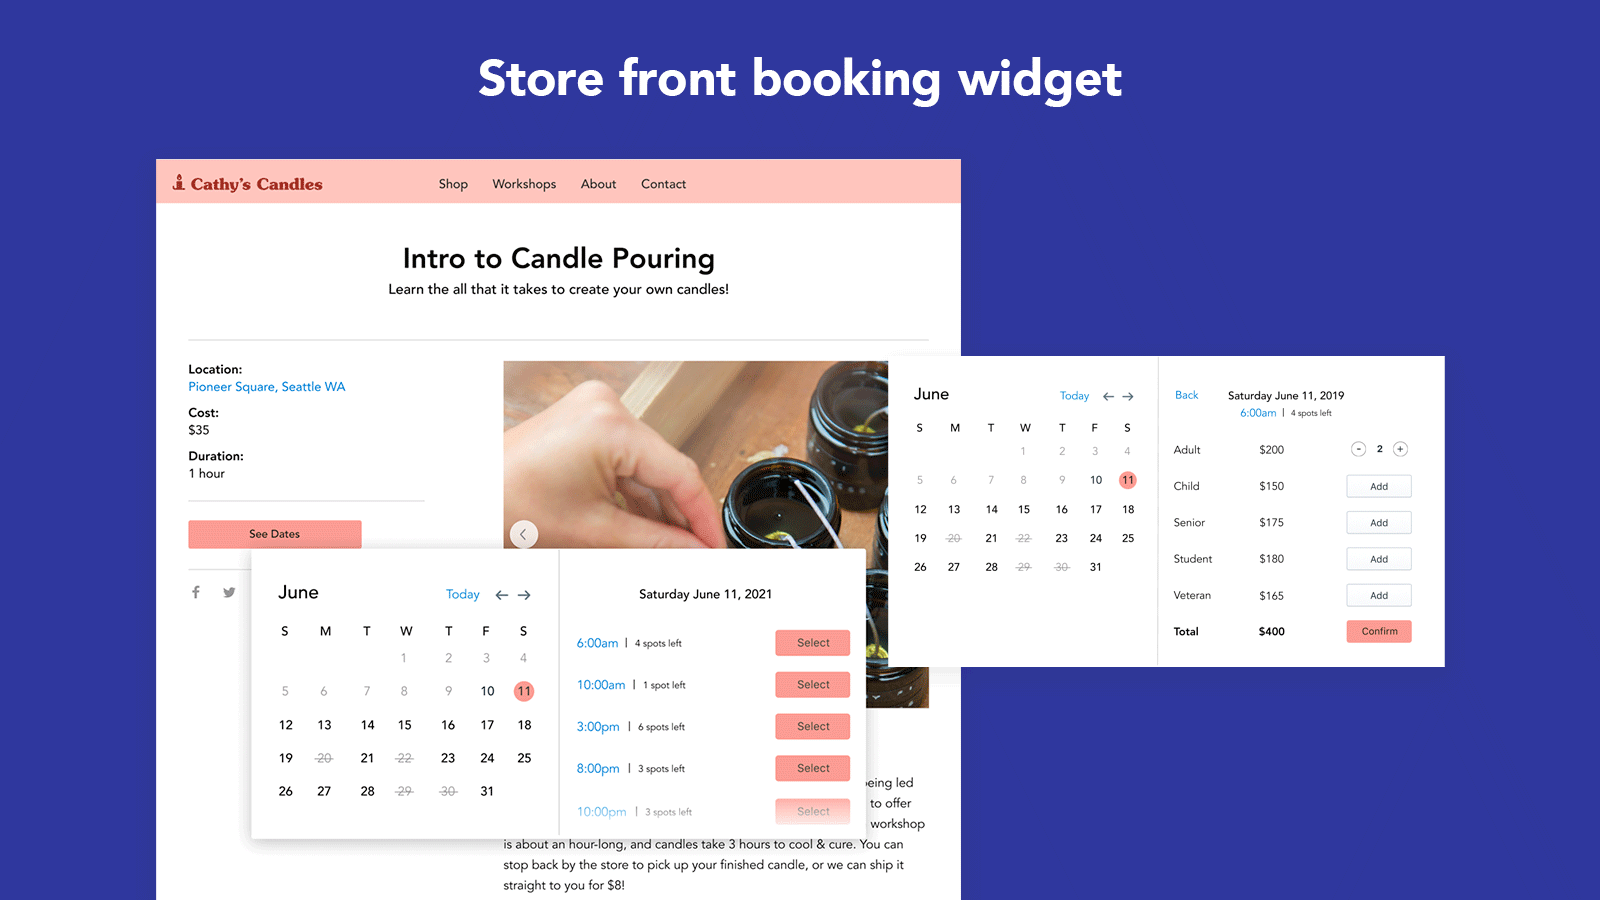 Customer Booking Experience - Choose Quantity